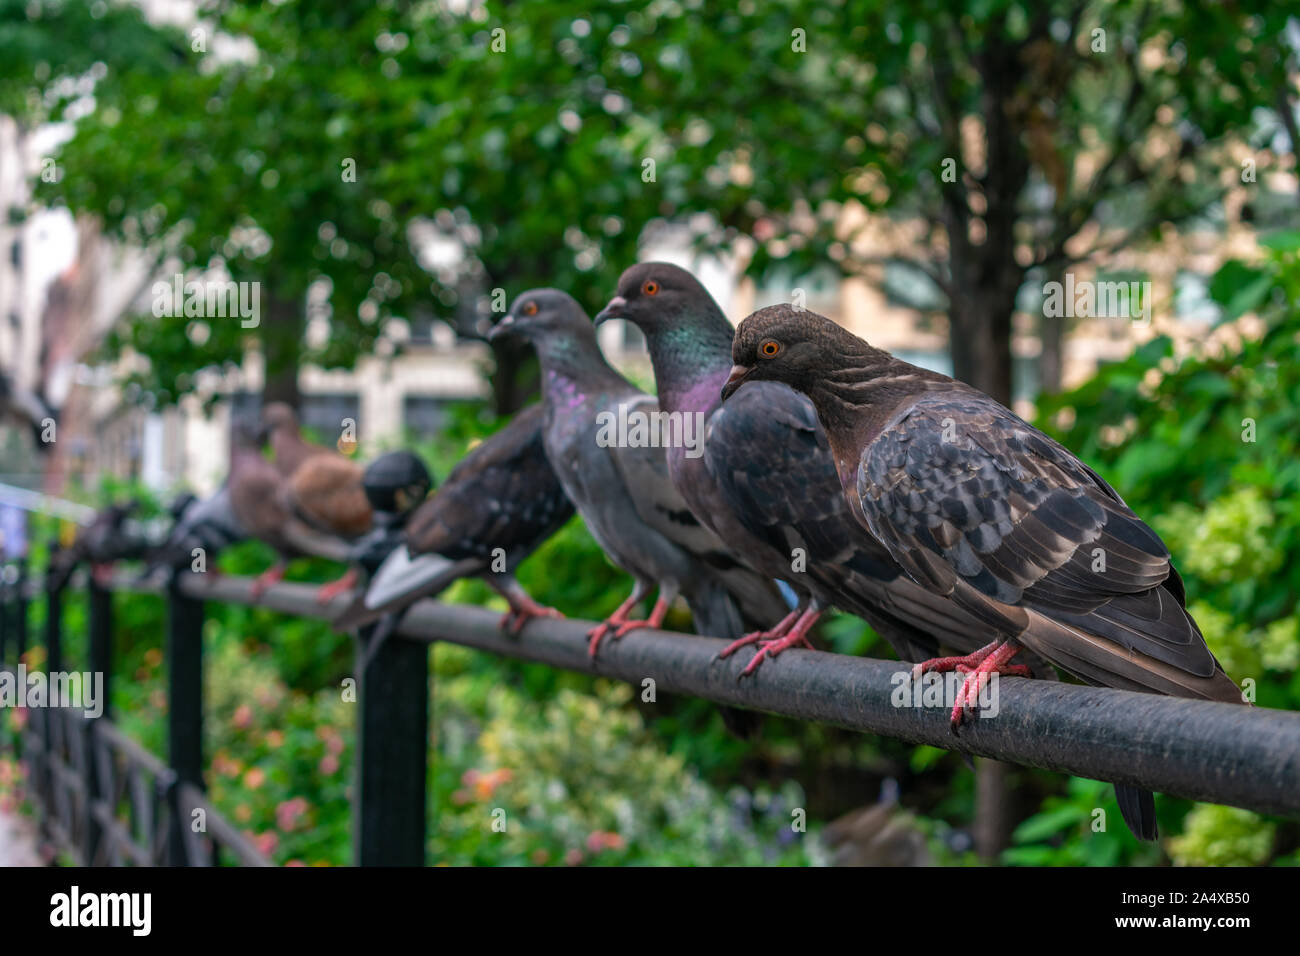 A Row of Pigeons at Union Square Park in New York City Stock Photo